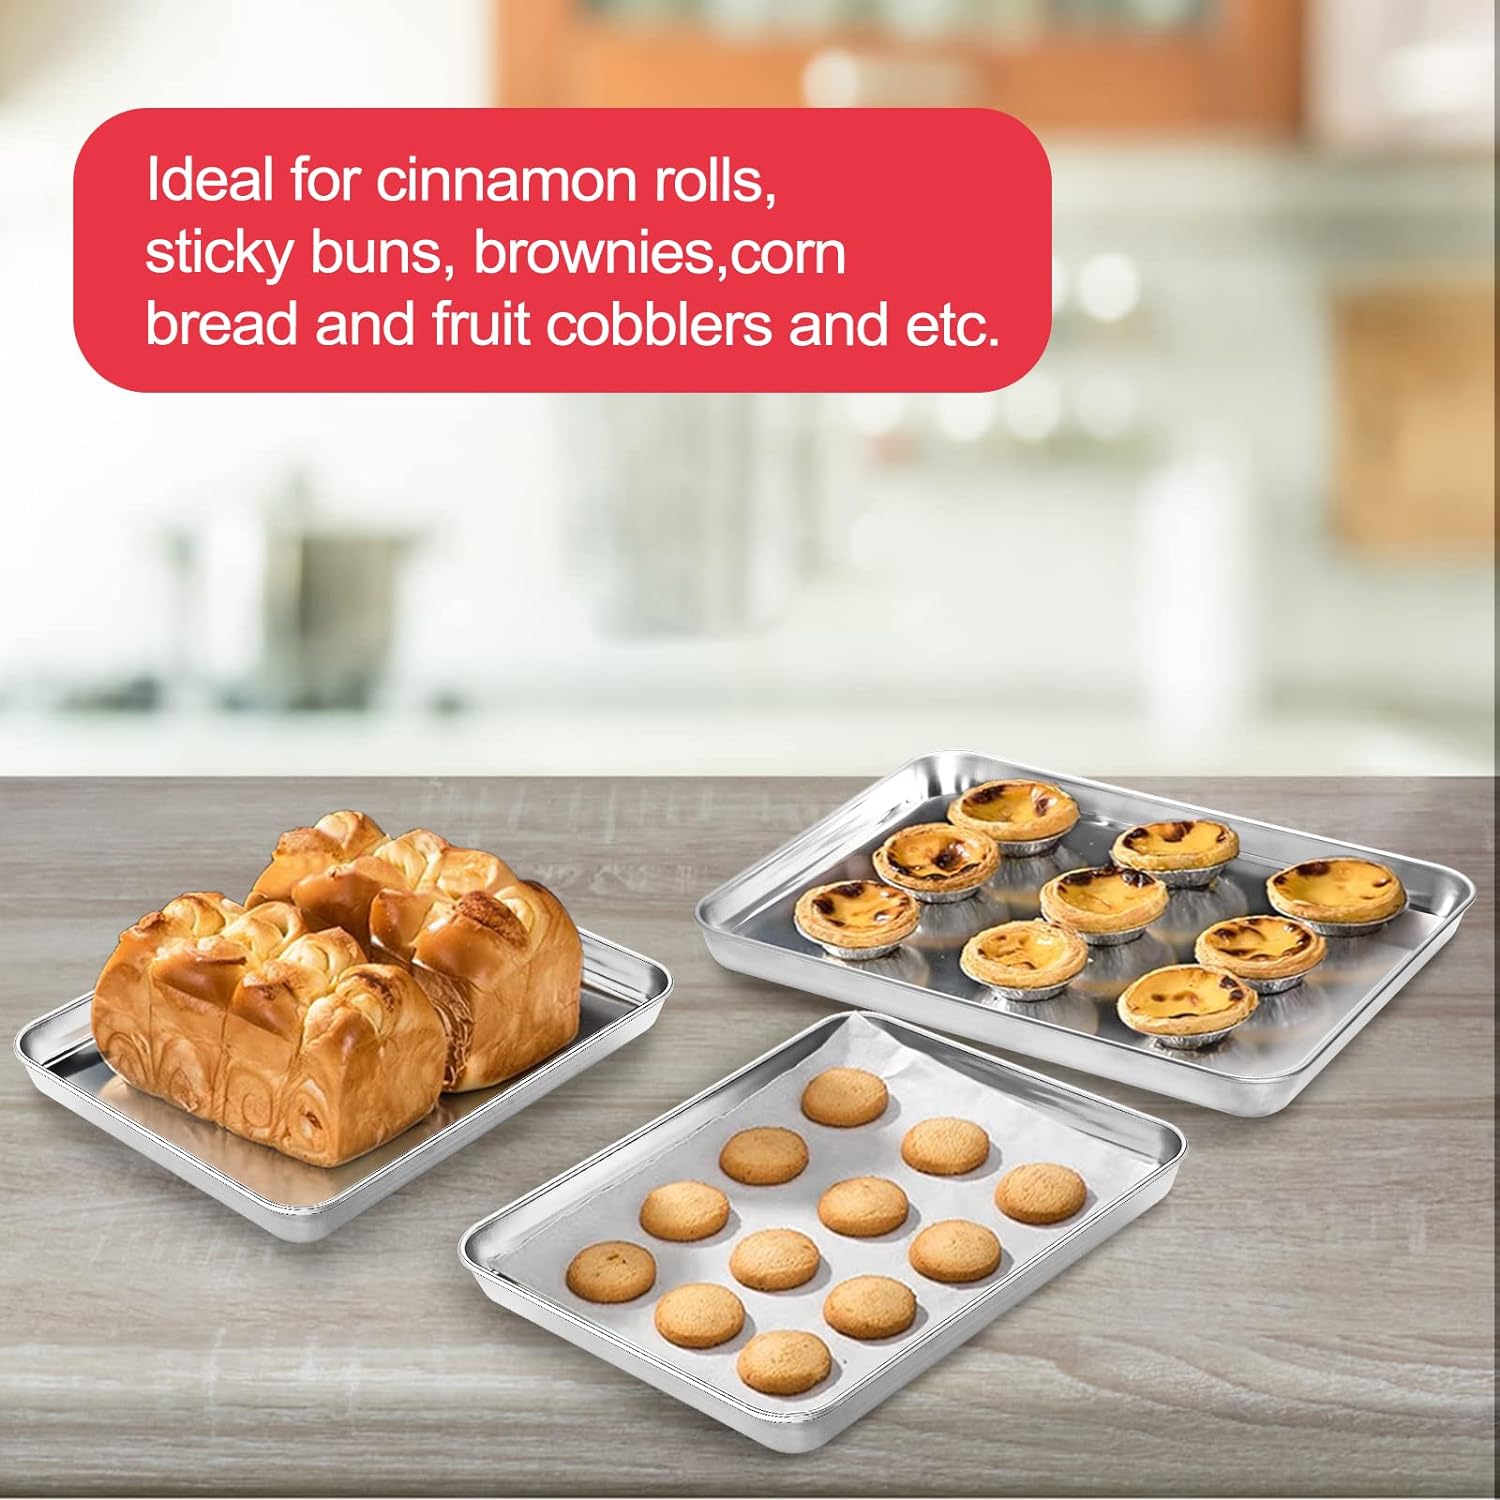 4 Pan Kit to fit Easy bake ovens, Heart Pan, 2 Round Pans